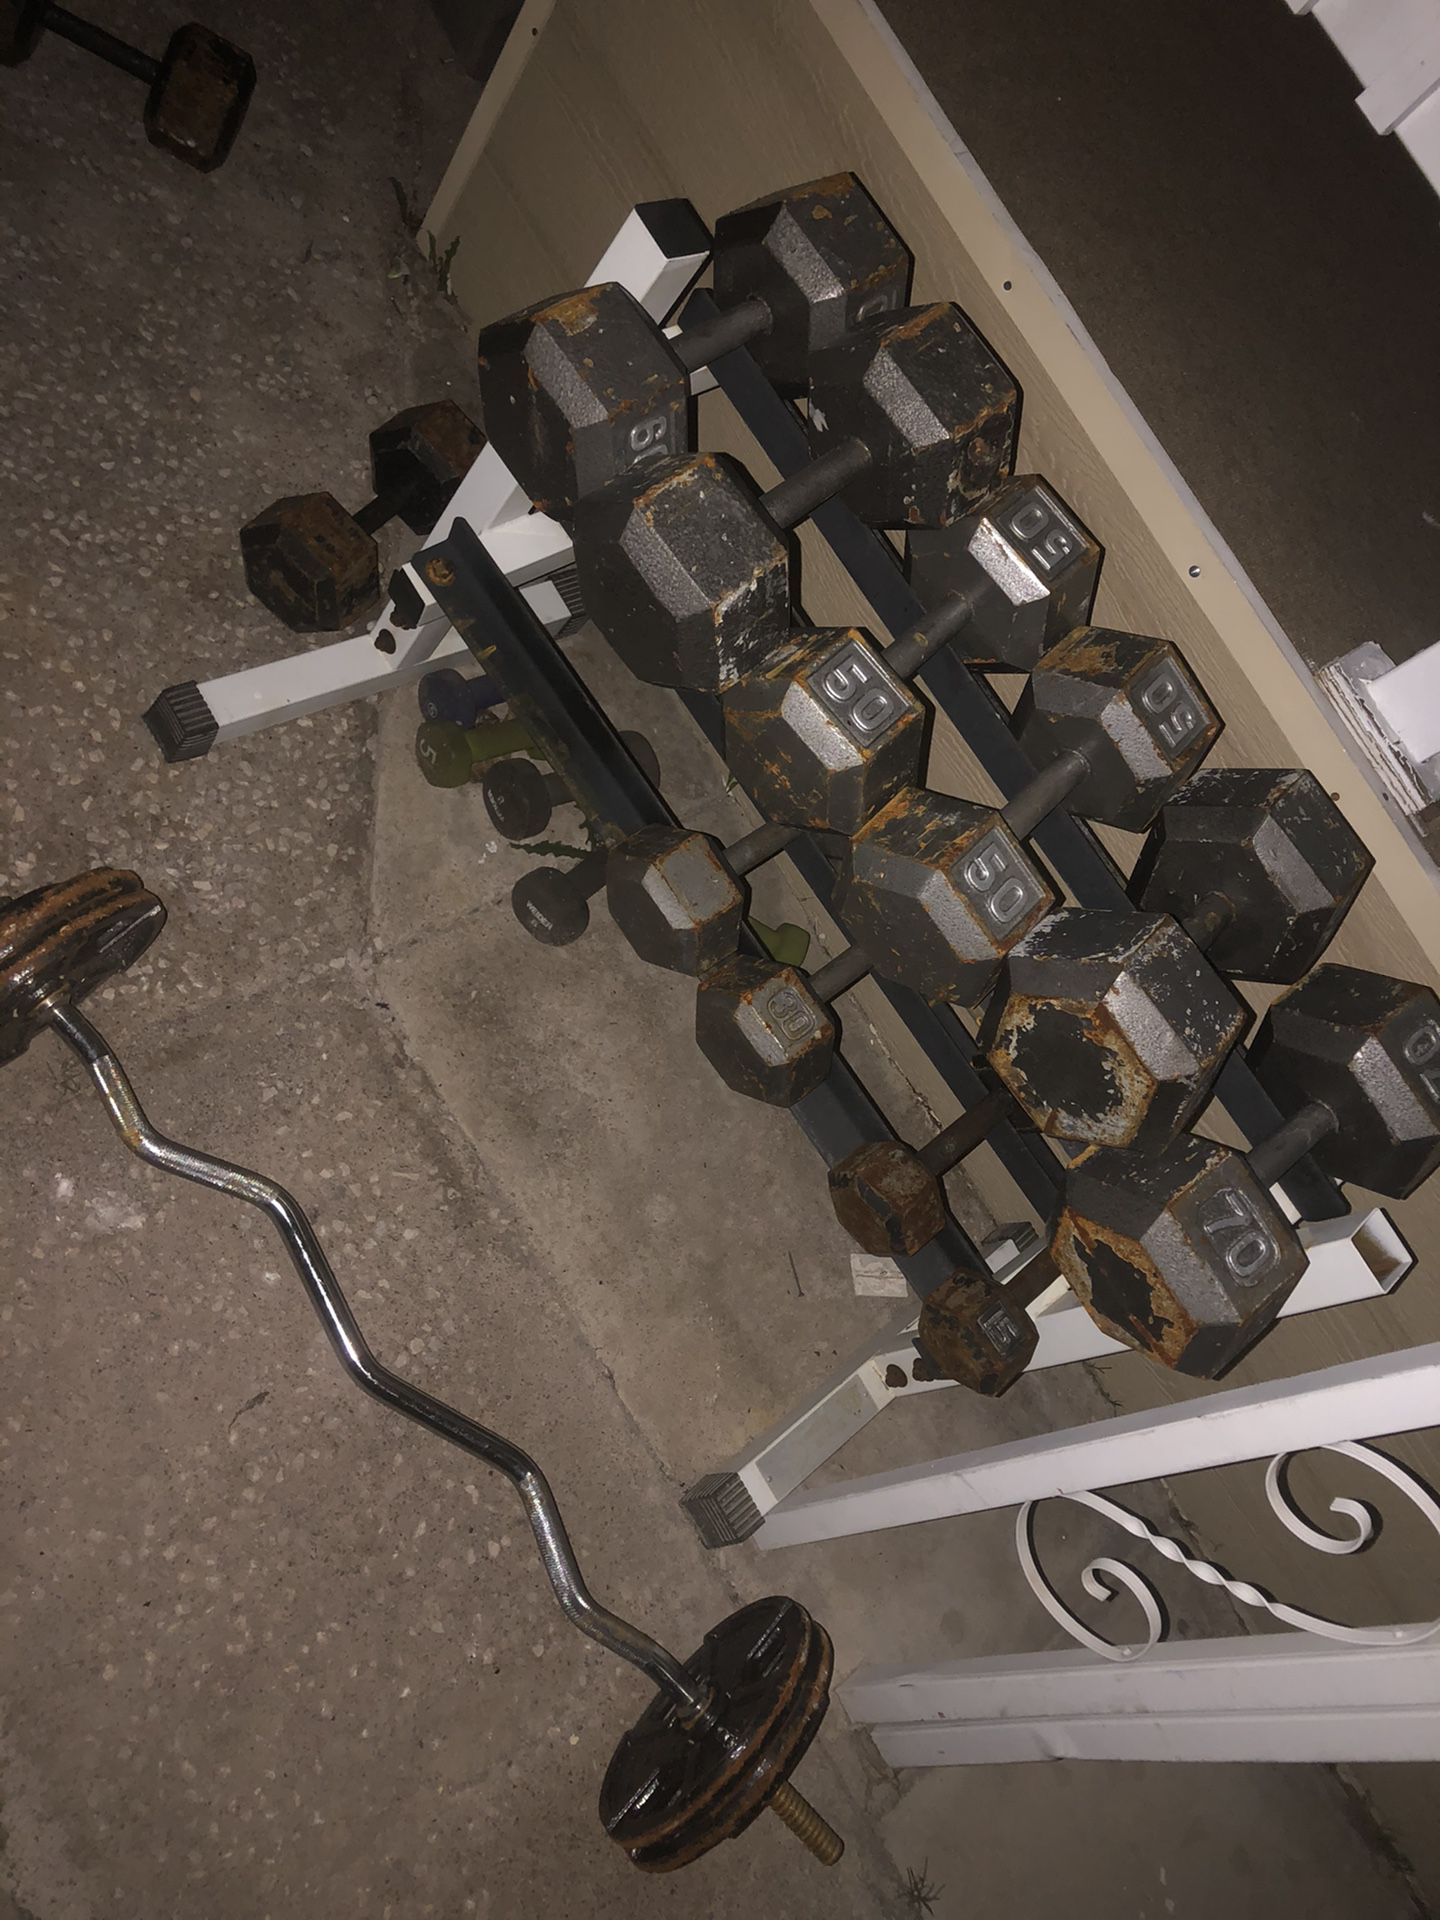 Dumbbells and curling bar whit extra weights and a battle rope